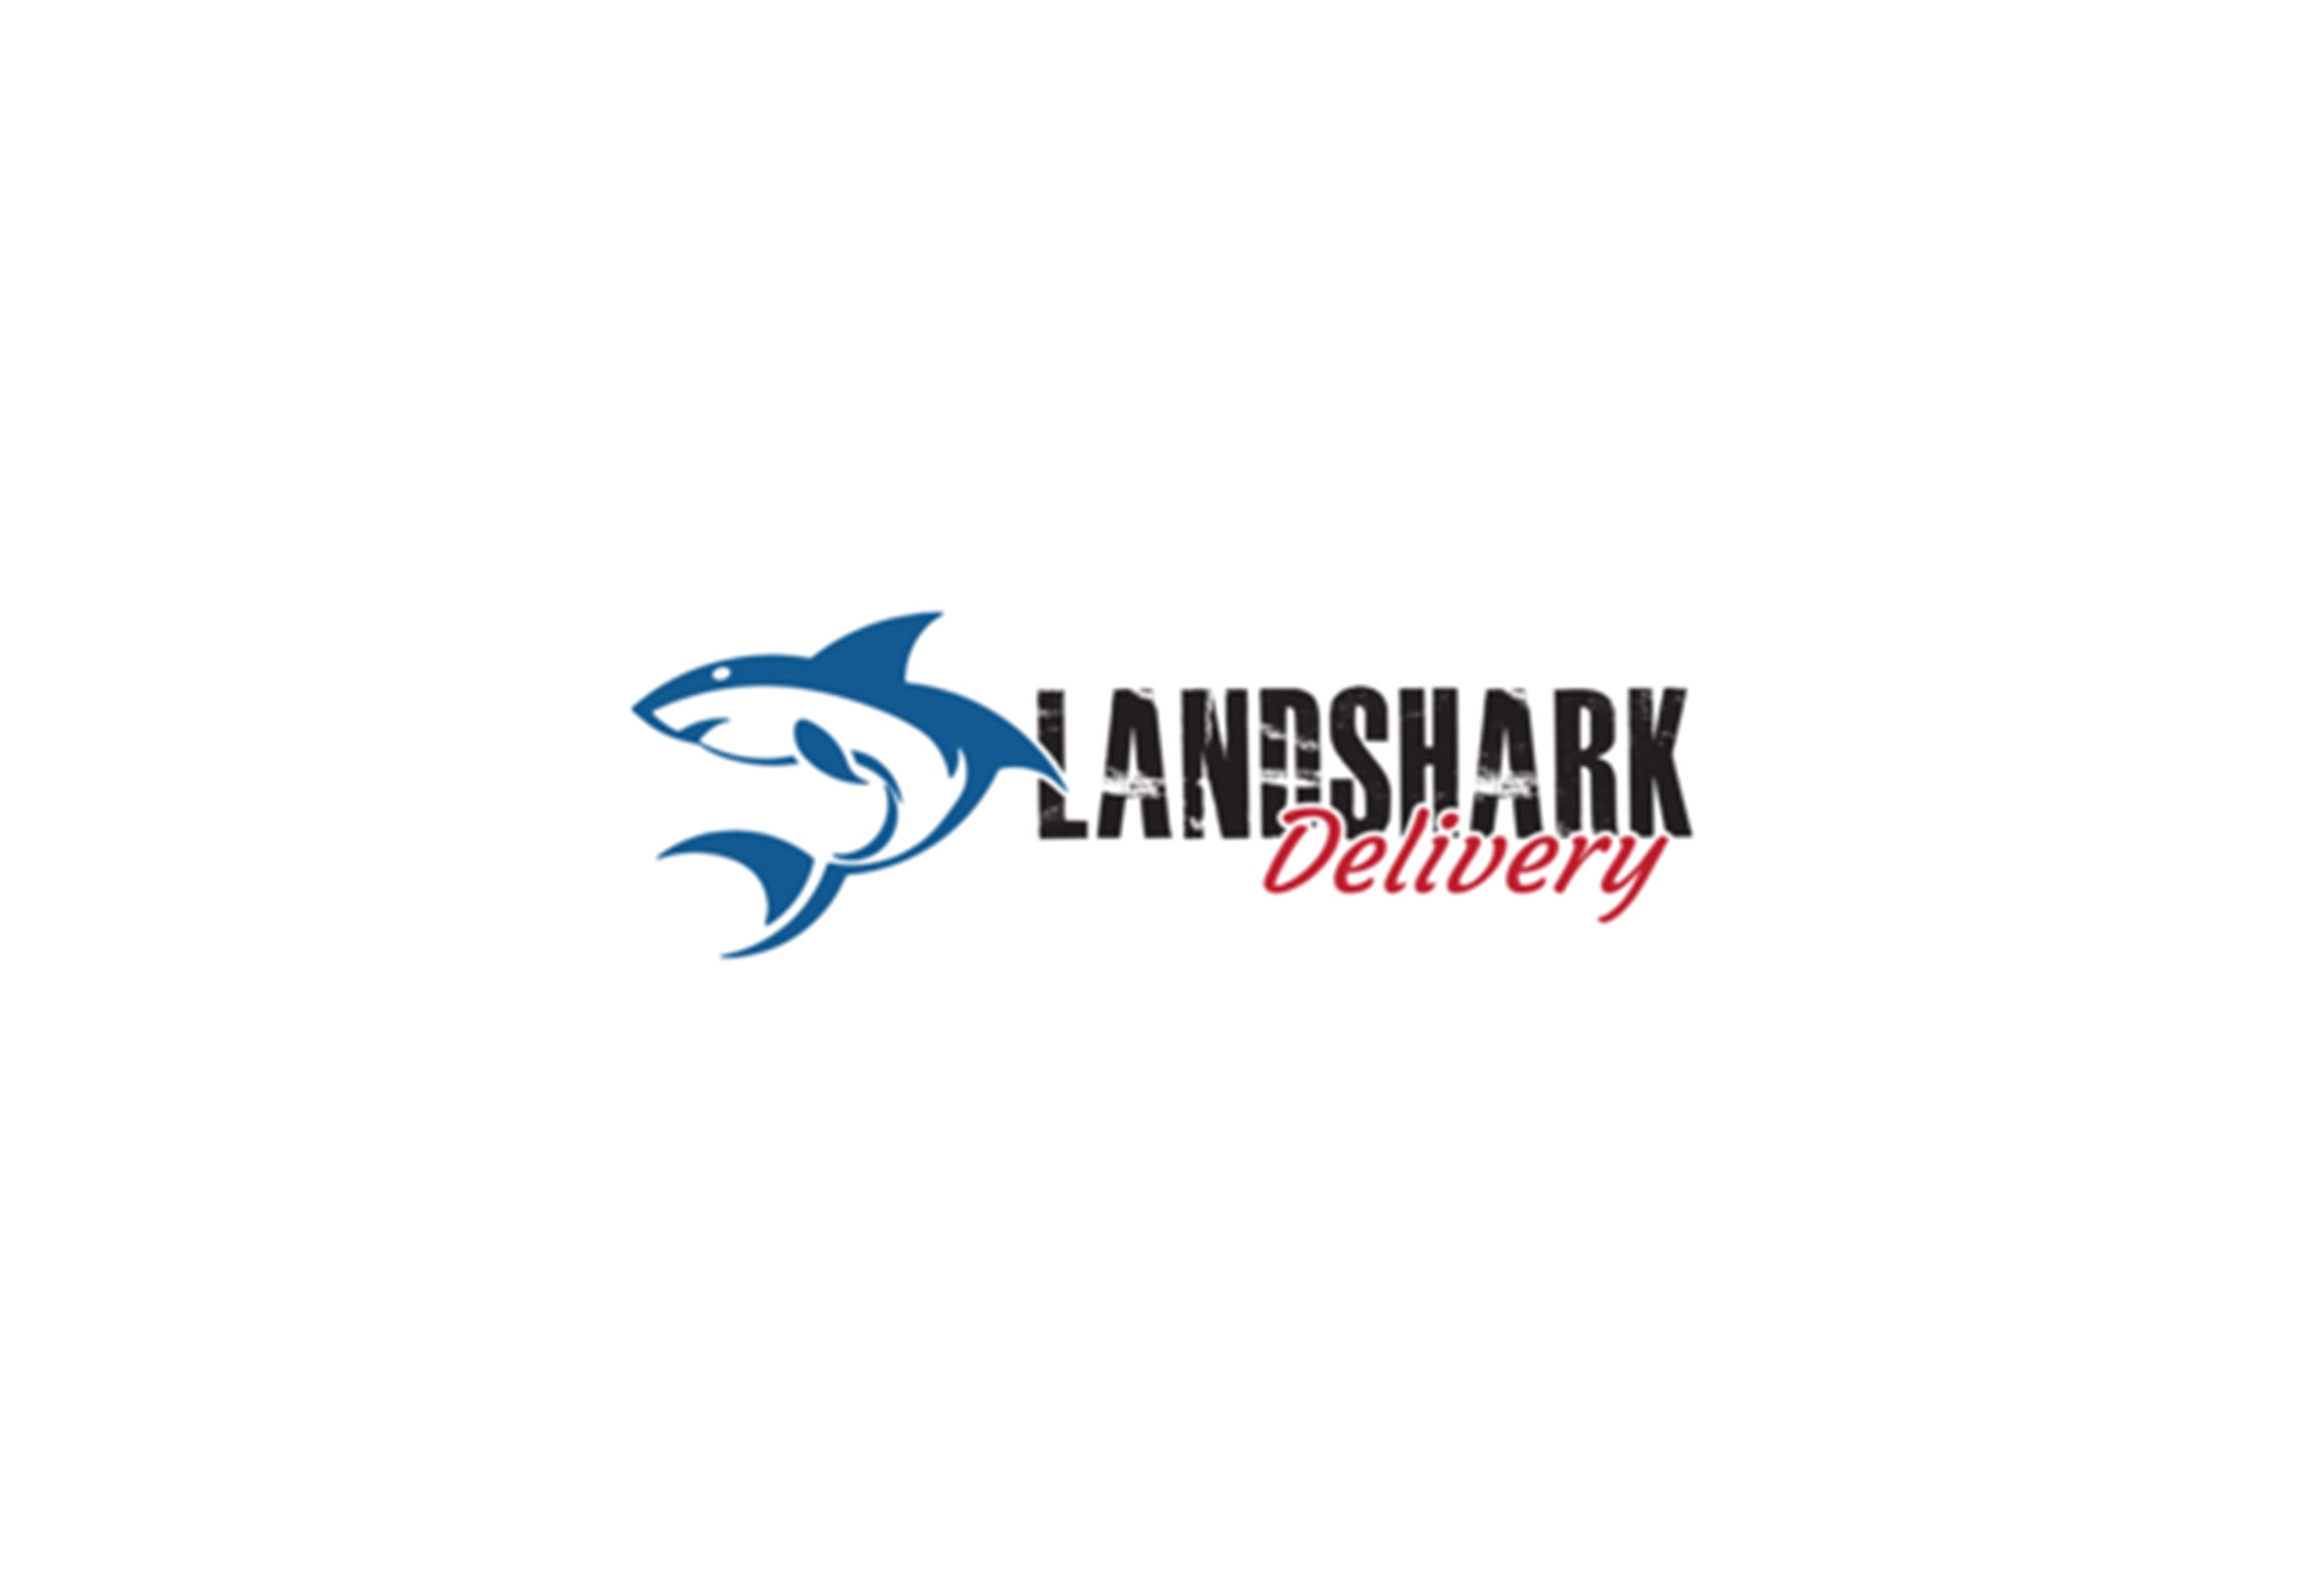 Landshark Delivery acquired by Bite Squad - The Oxford Eagle | The ...